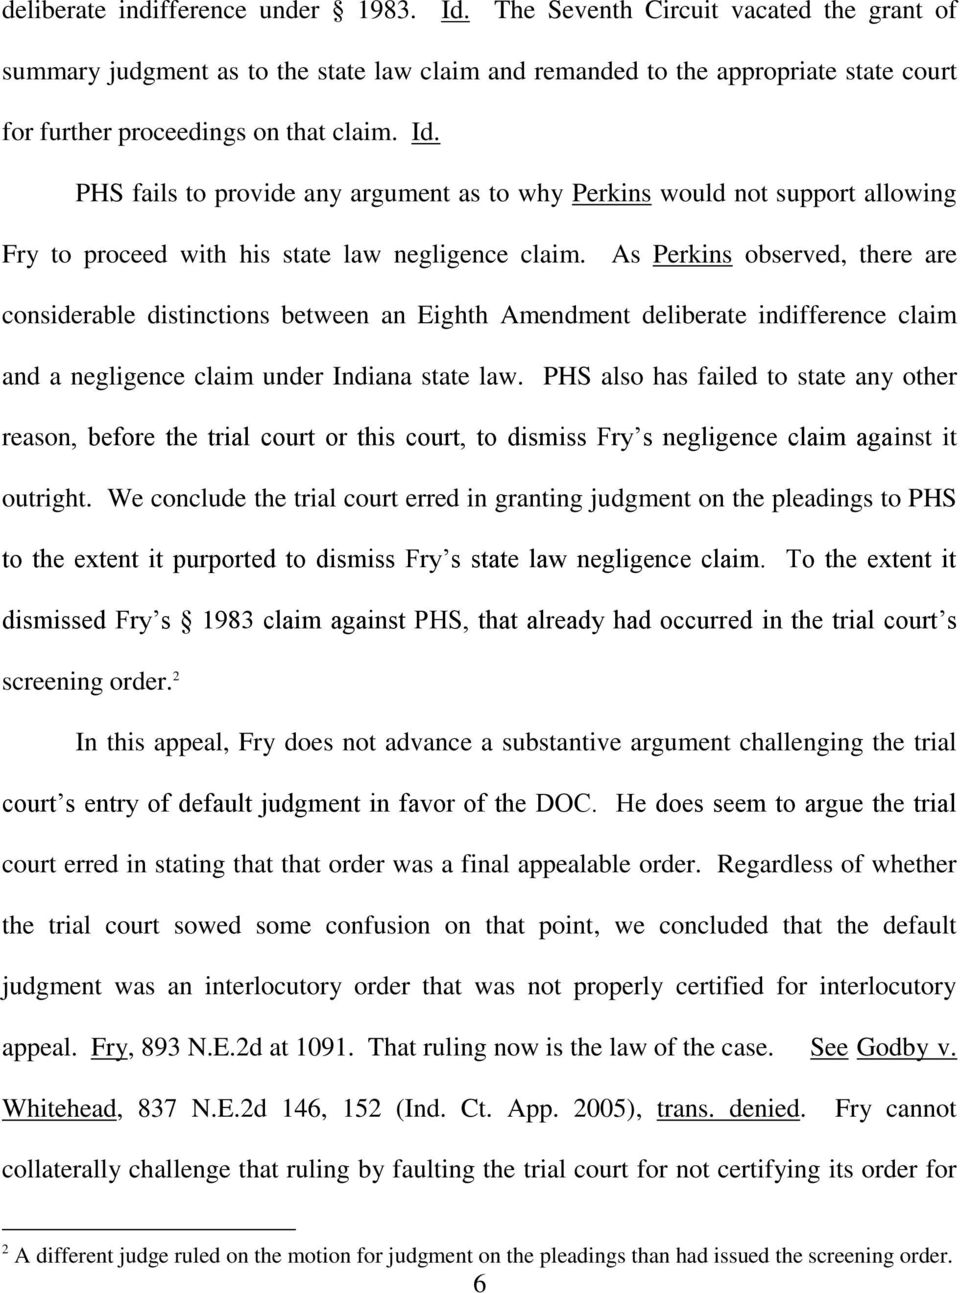 PHS fails to provide any argument as to why Perkins would not support allowing Fry to proceed with his state law negligence claim.